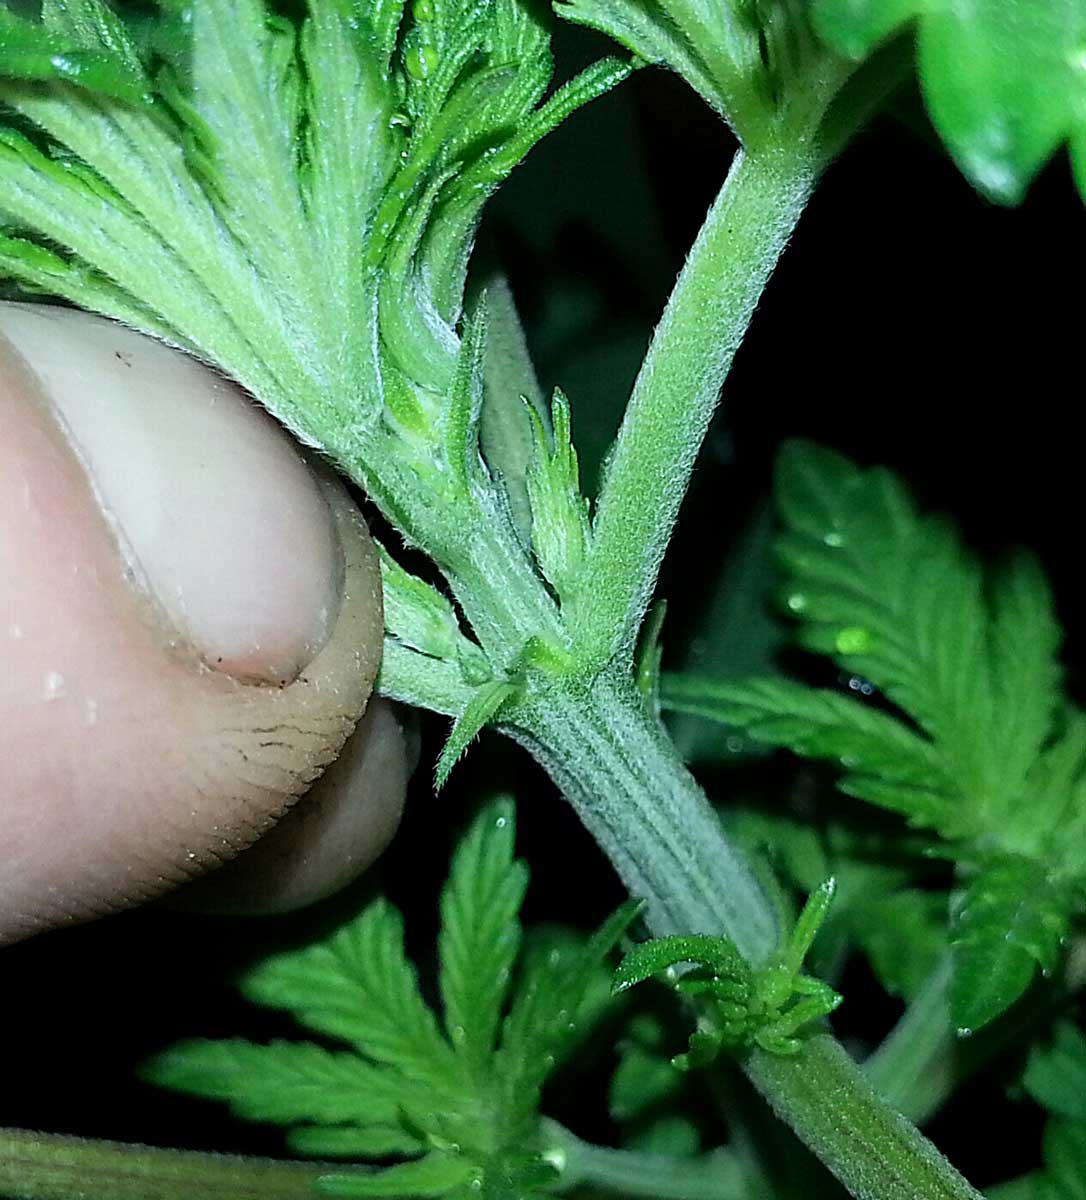 Example of a male cannabis pre-flower that.